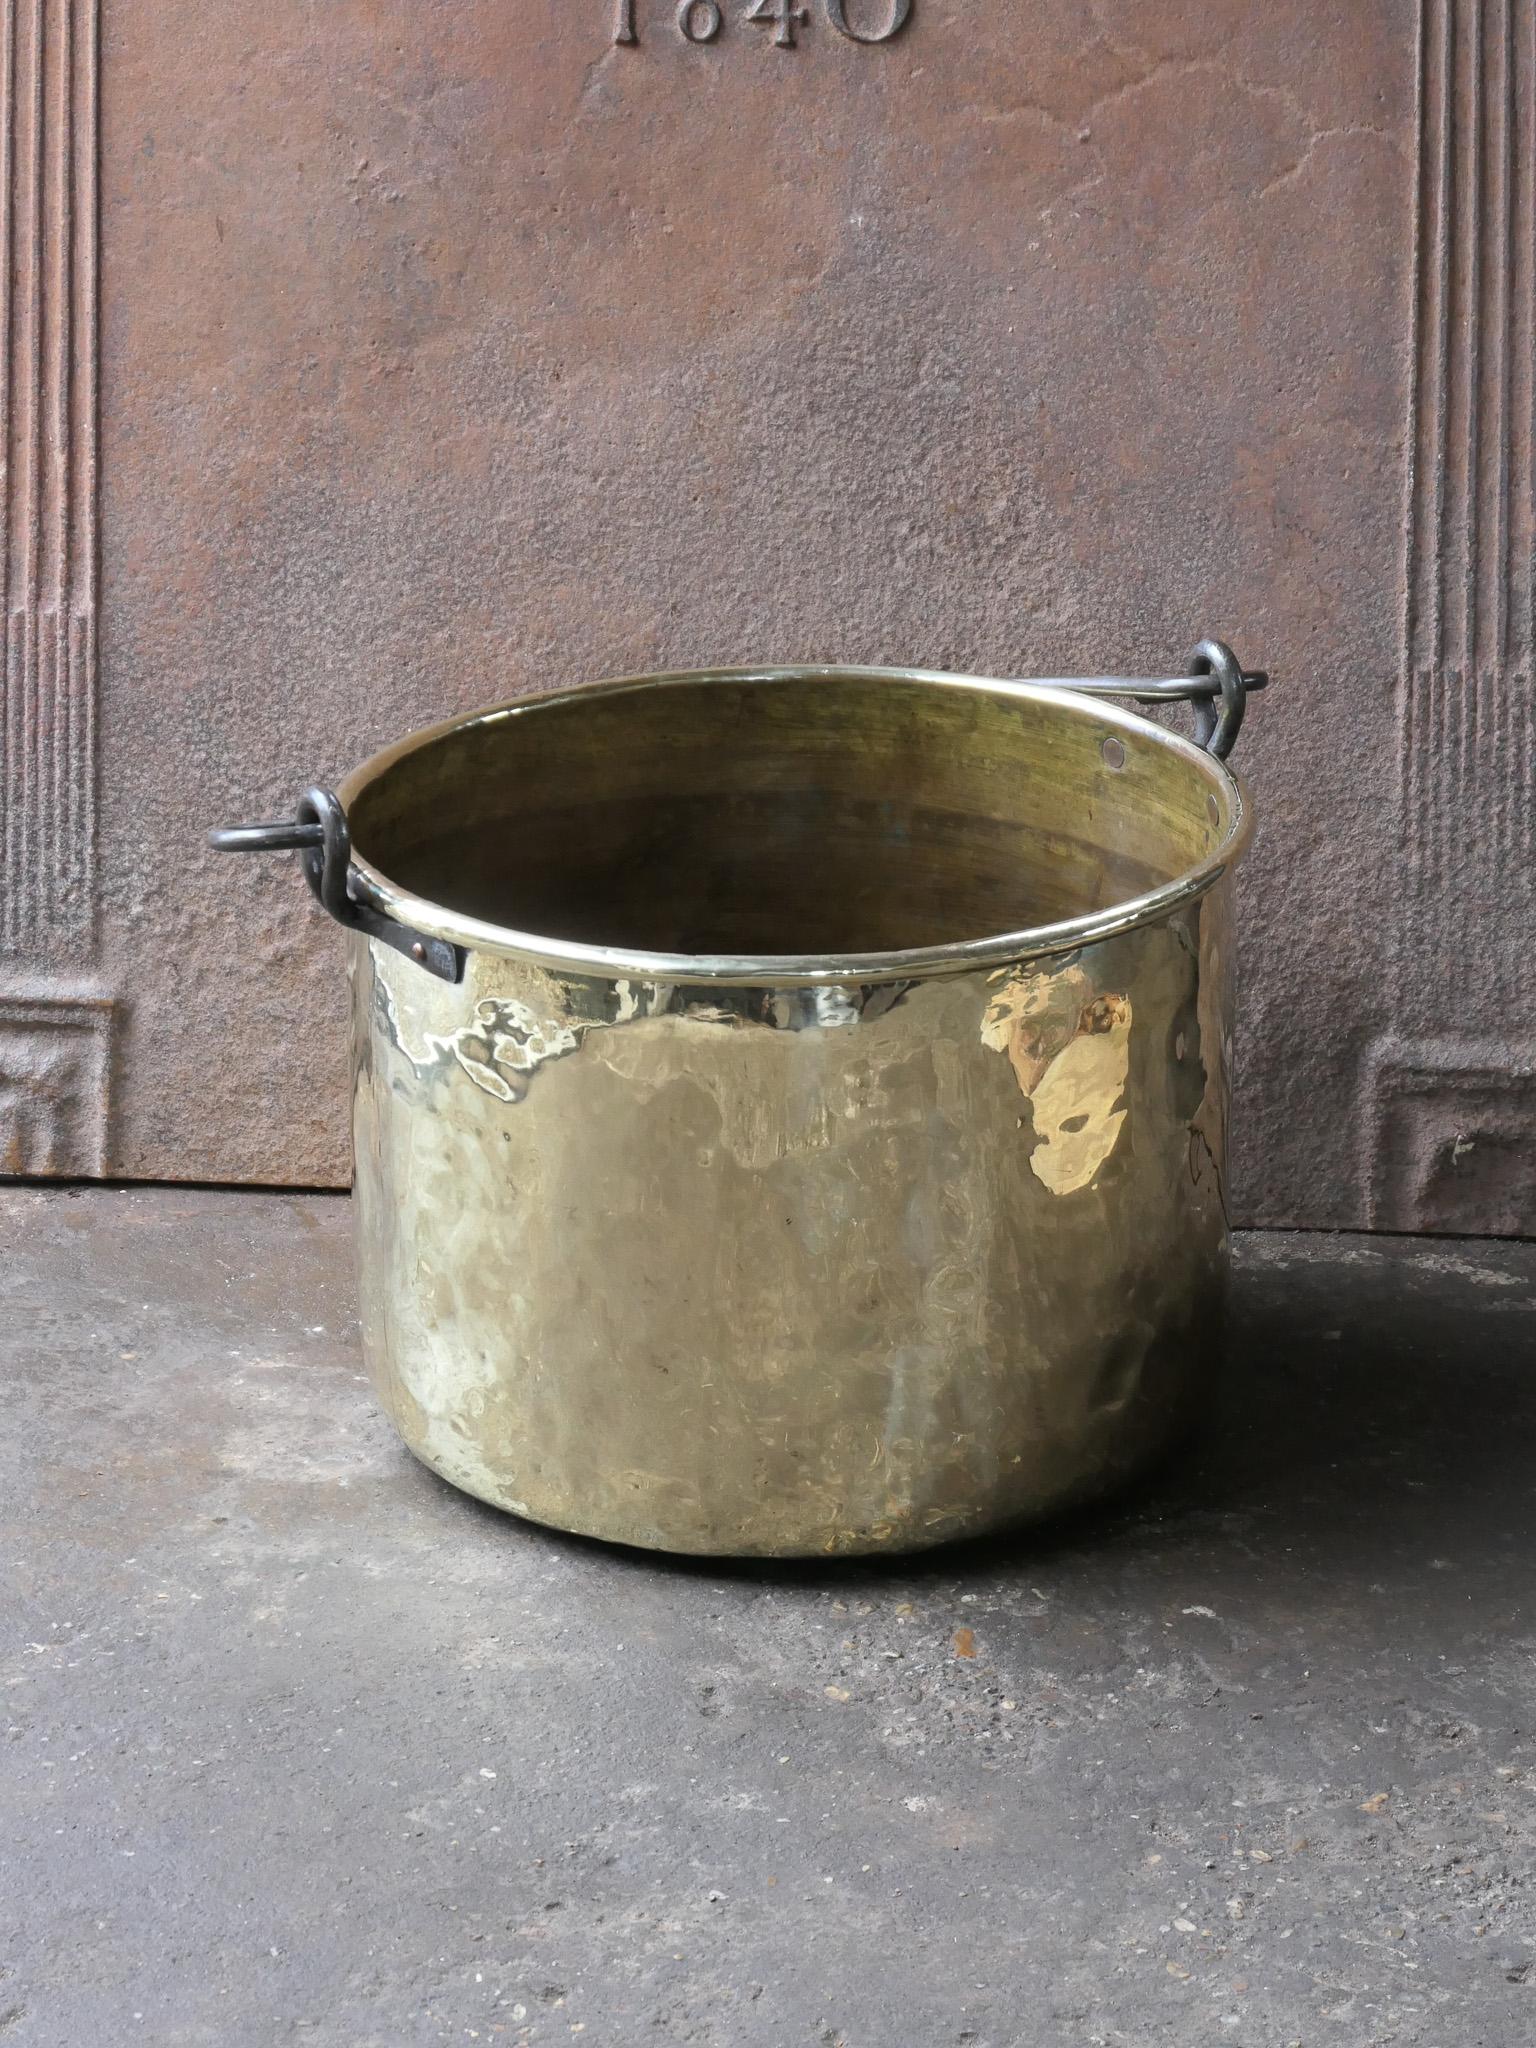 18th Century Dutch log basket. The firewood basket is made of polished copper and brass and has a wrought iron handle. Also called 'aker'. Used to draw water from the well and cook over an open fire.

The log holder is in a good condition and is